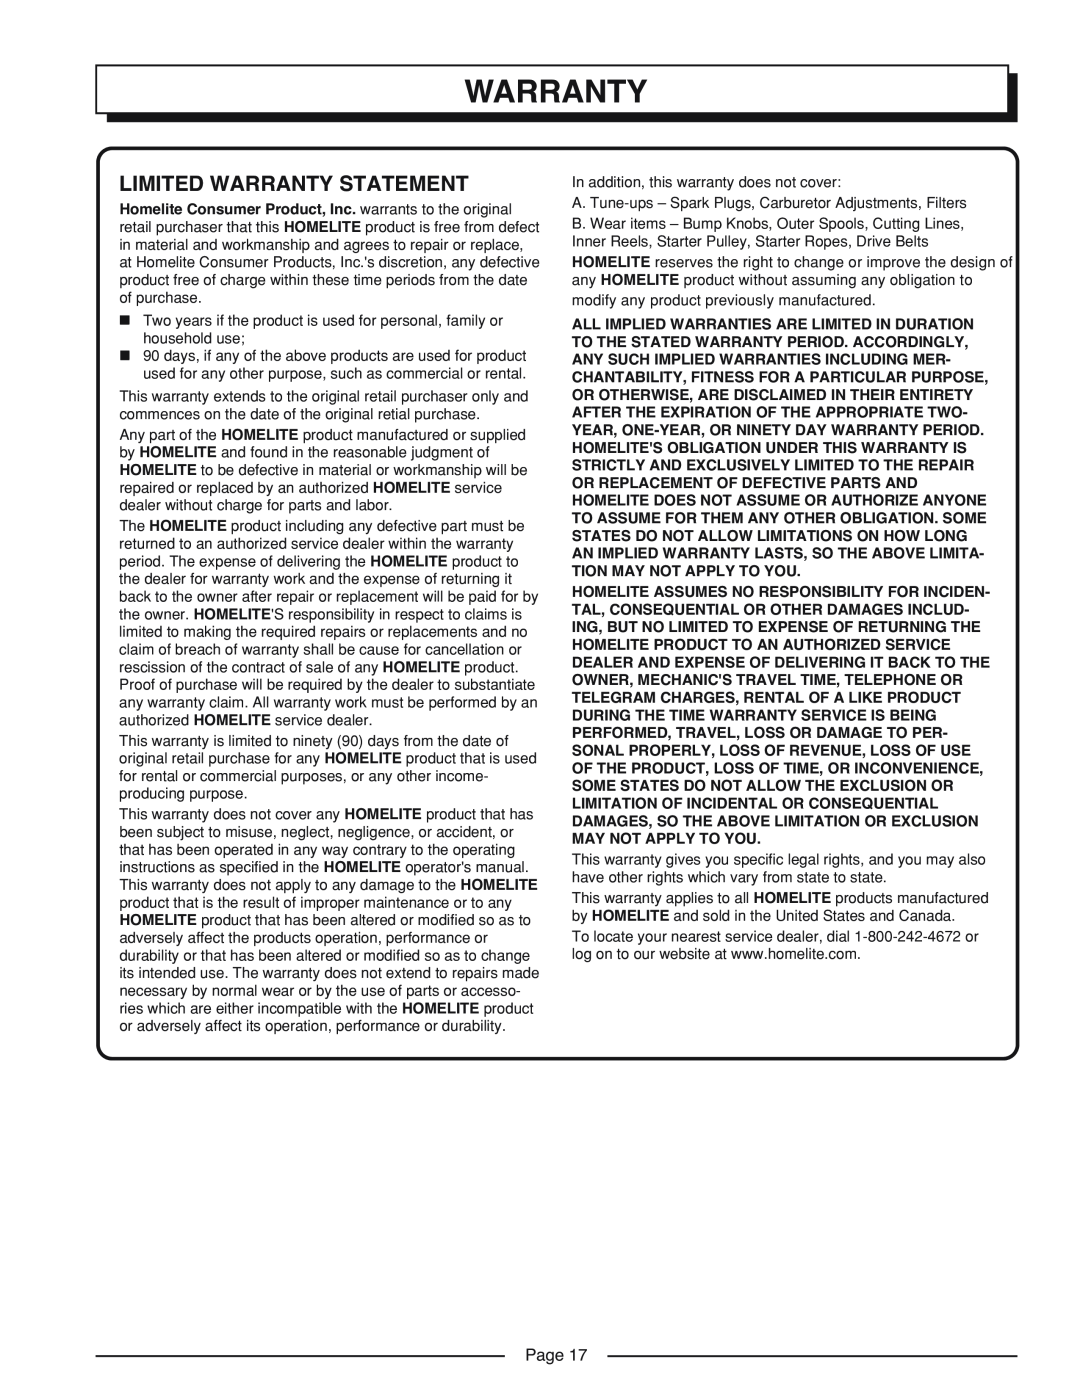 Homelite UT41002A manual Limited Warranty Statement, Page 